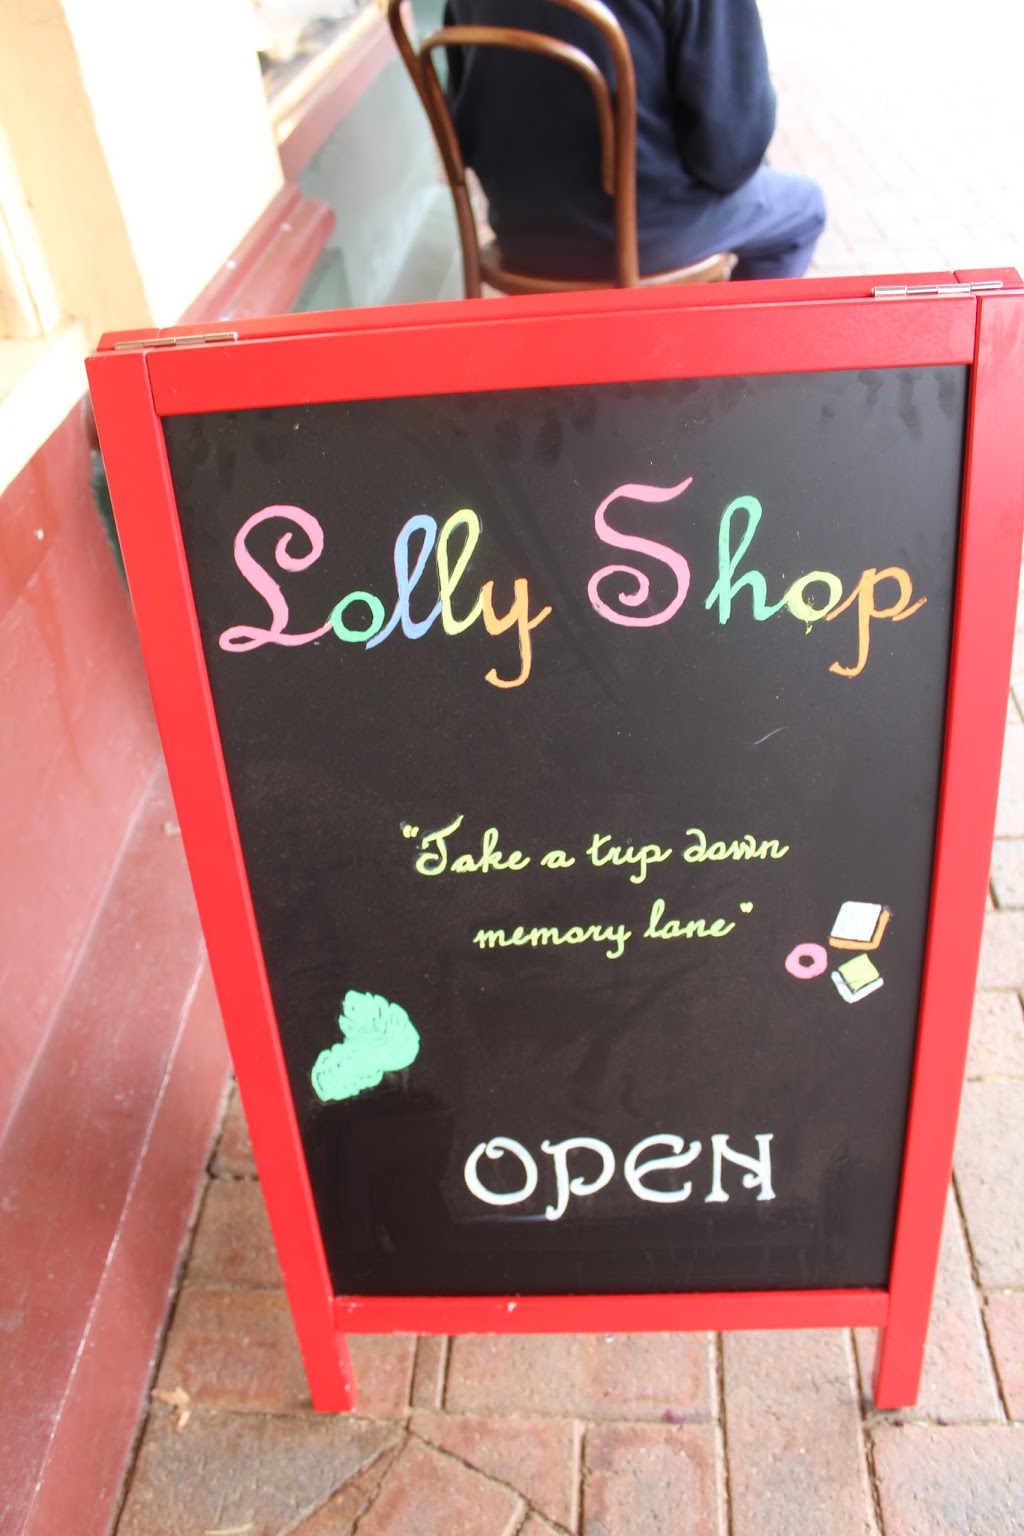 The Toodyay Lolly Shop | store | 121E Stirling Terrace, Toodyay WA 6566, Australia | 0404126229 OR +61 404 126 229